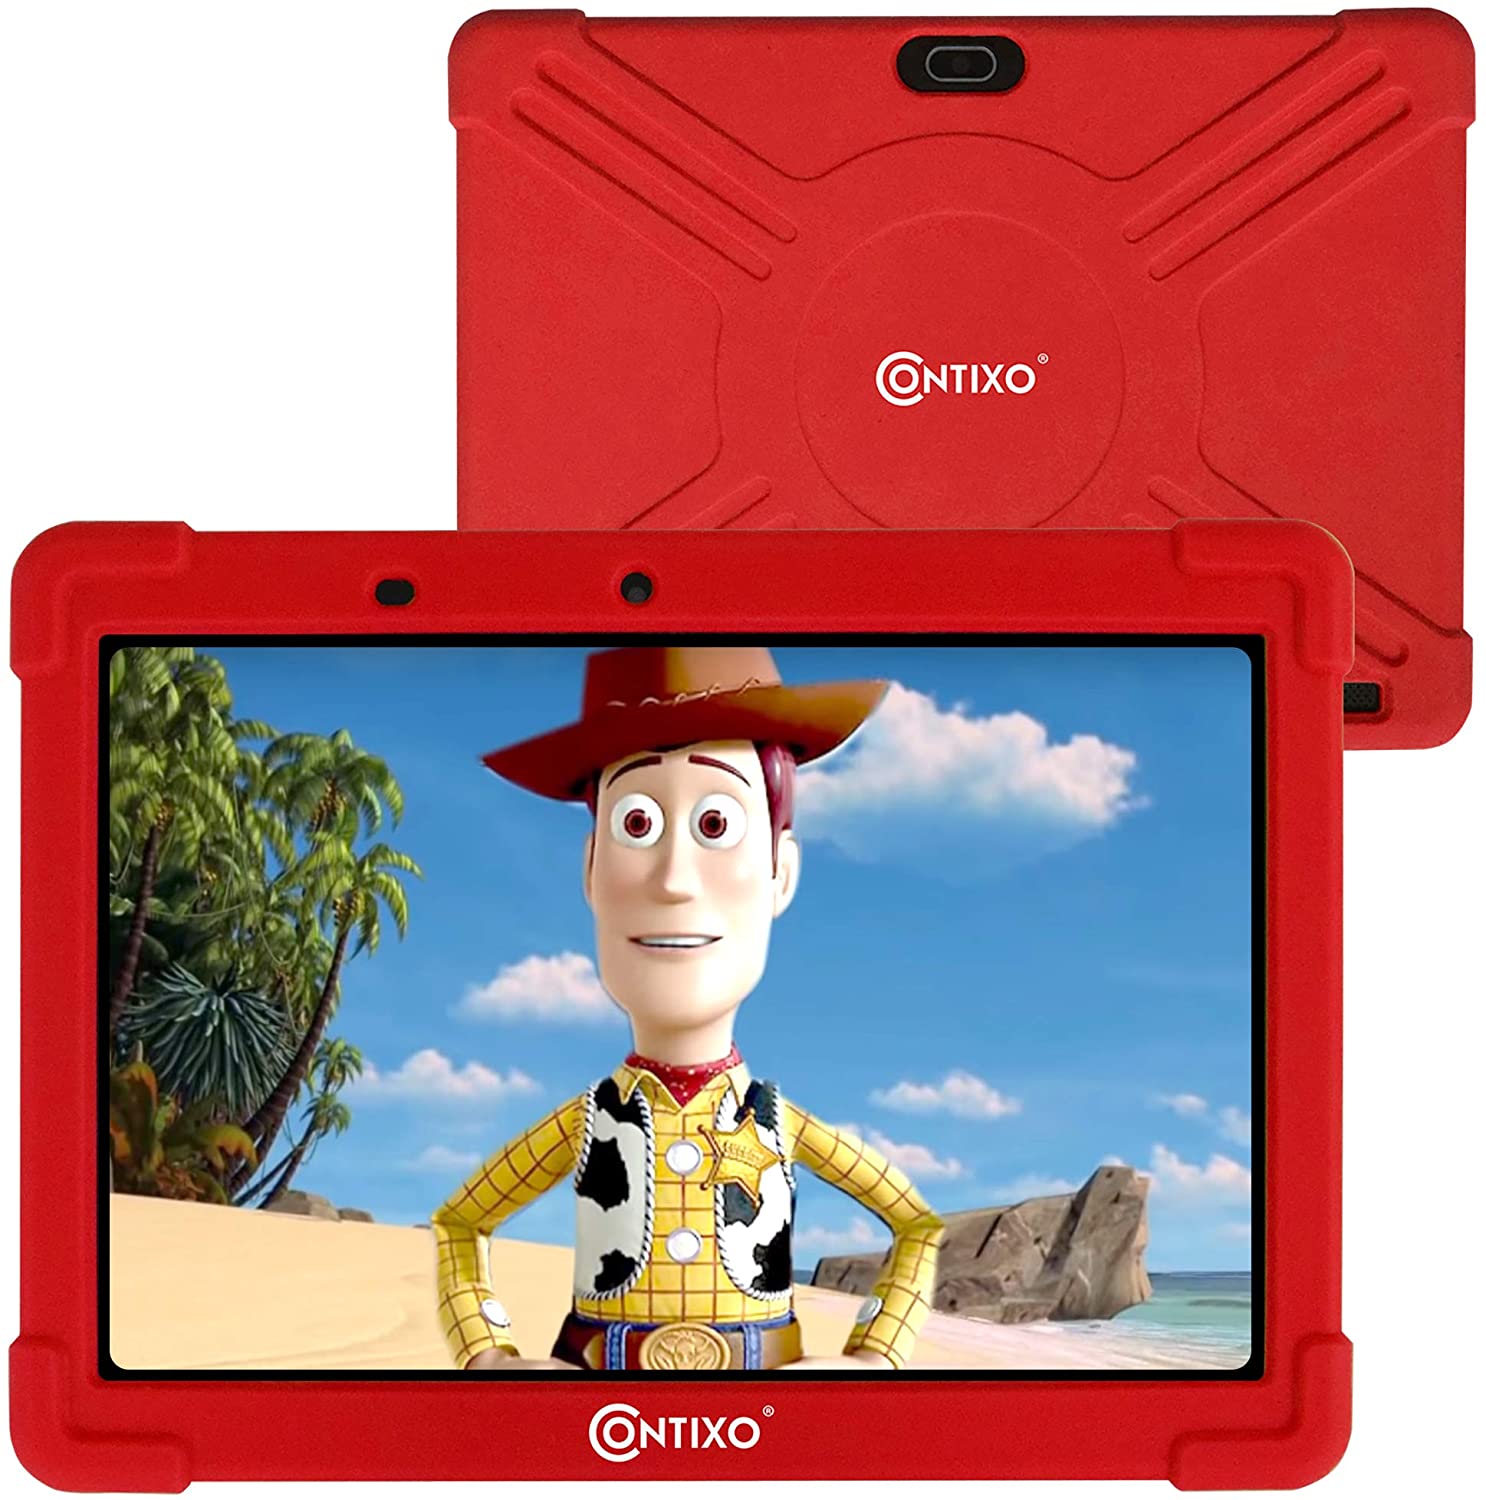 Contixo Contixo K101A 10 inch Display Kids Tablet with 2GB Ram 16GB Rom Android 10 Parental Control for Children Infant Toddlers at Home School